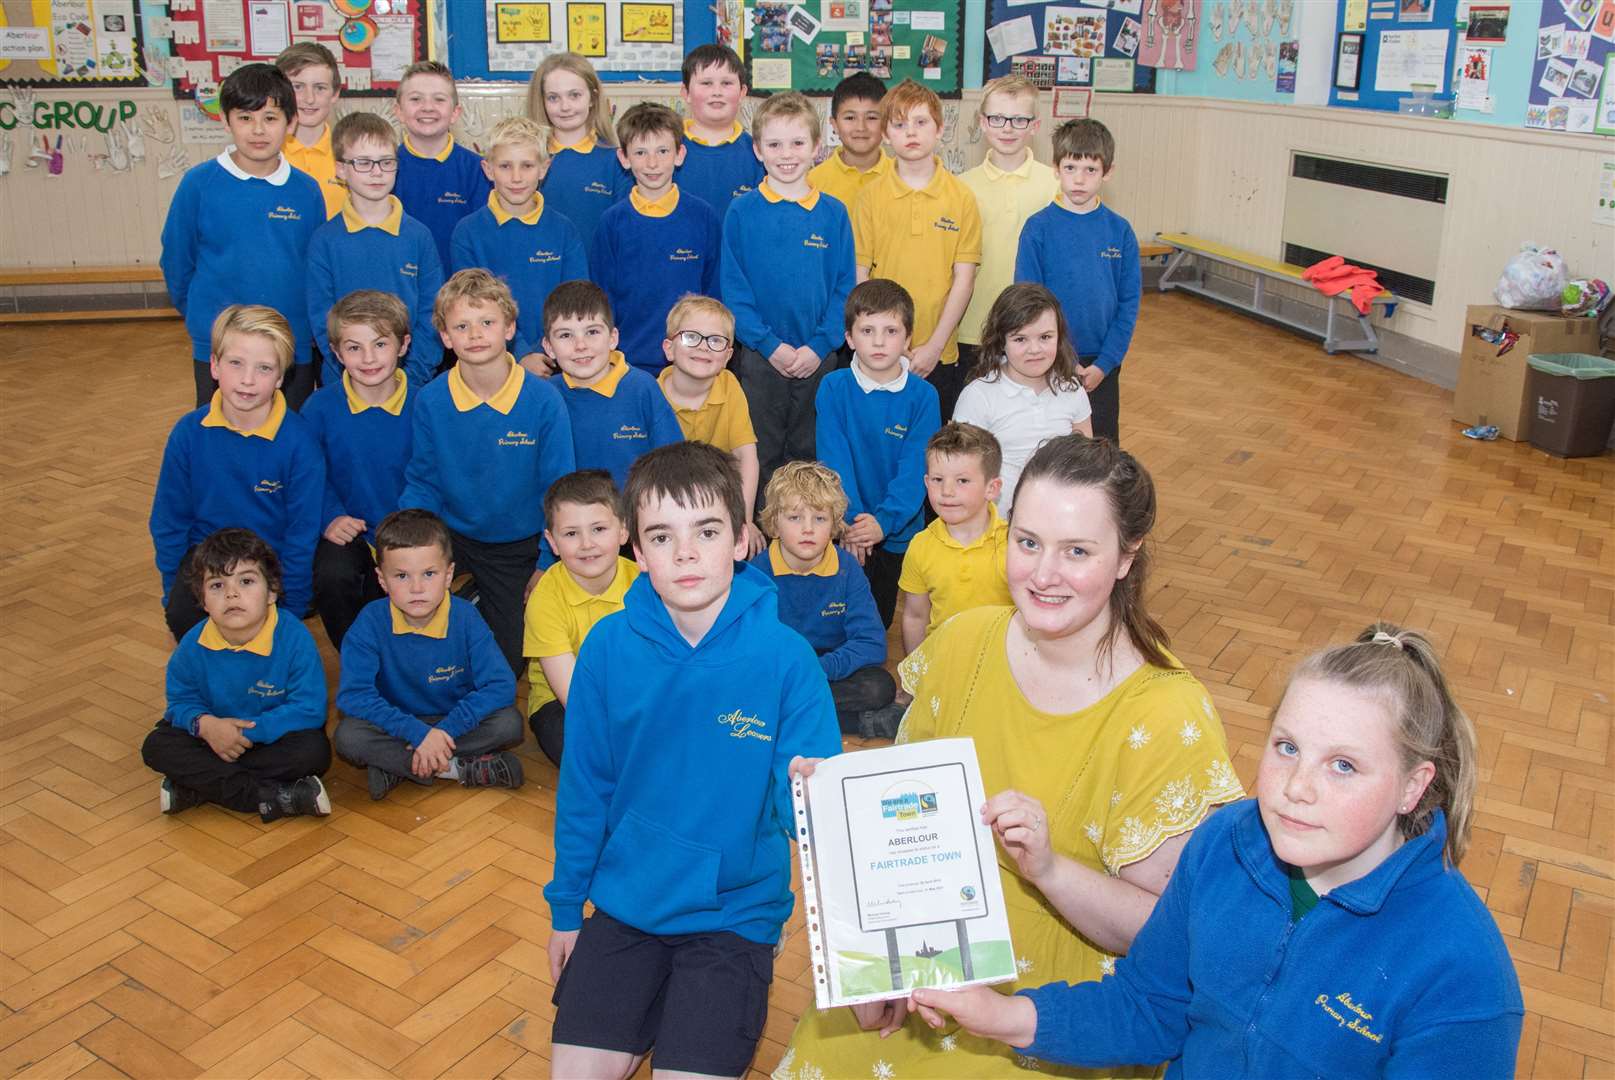 Front from left, Ethan Butchart, teacher Rebecca Thoms and Kayla Ewen. The Eco Group at Aberlour Primary School helped the town earn Fairtrade status.